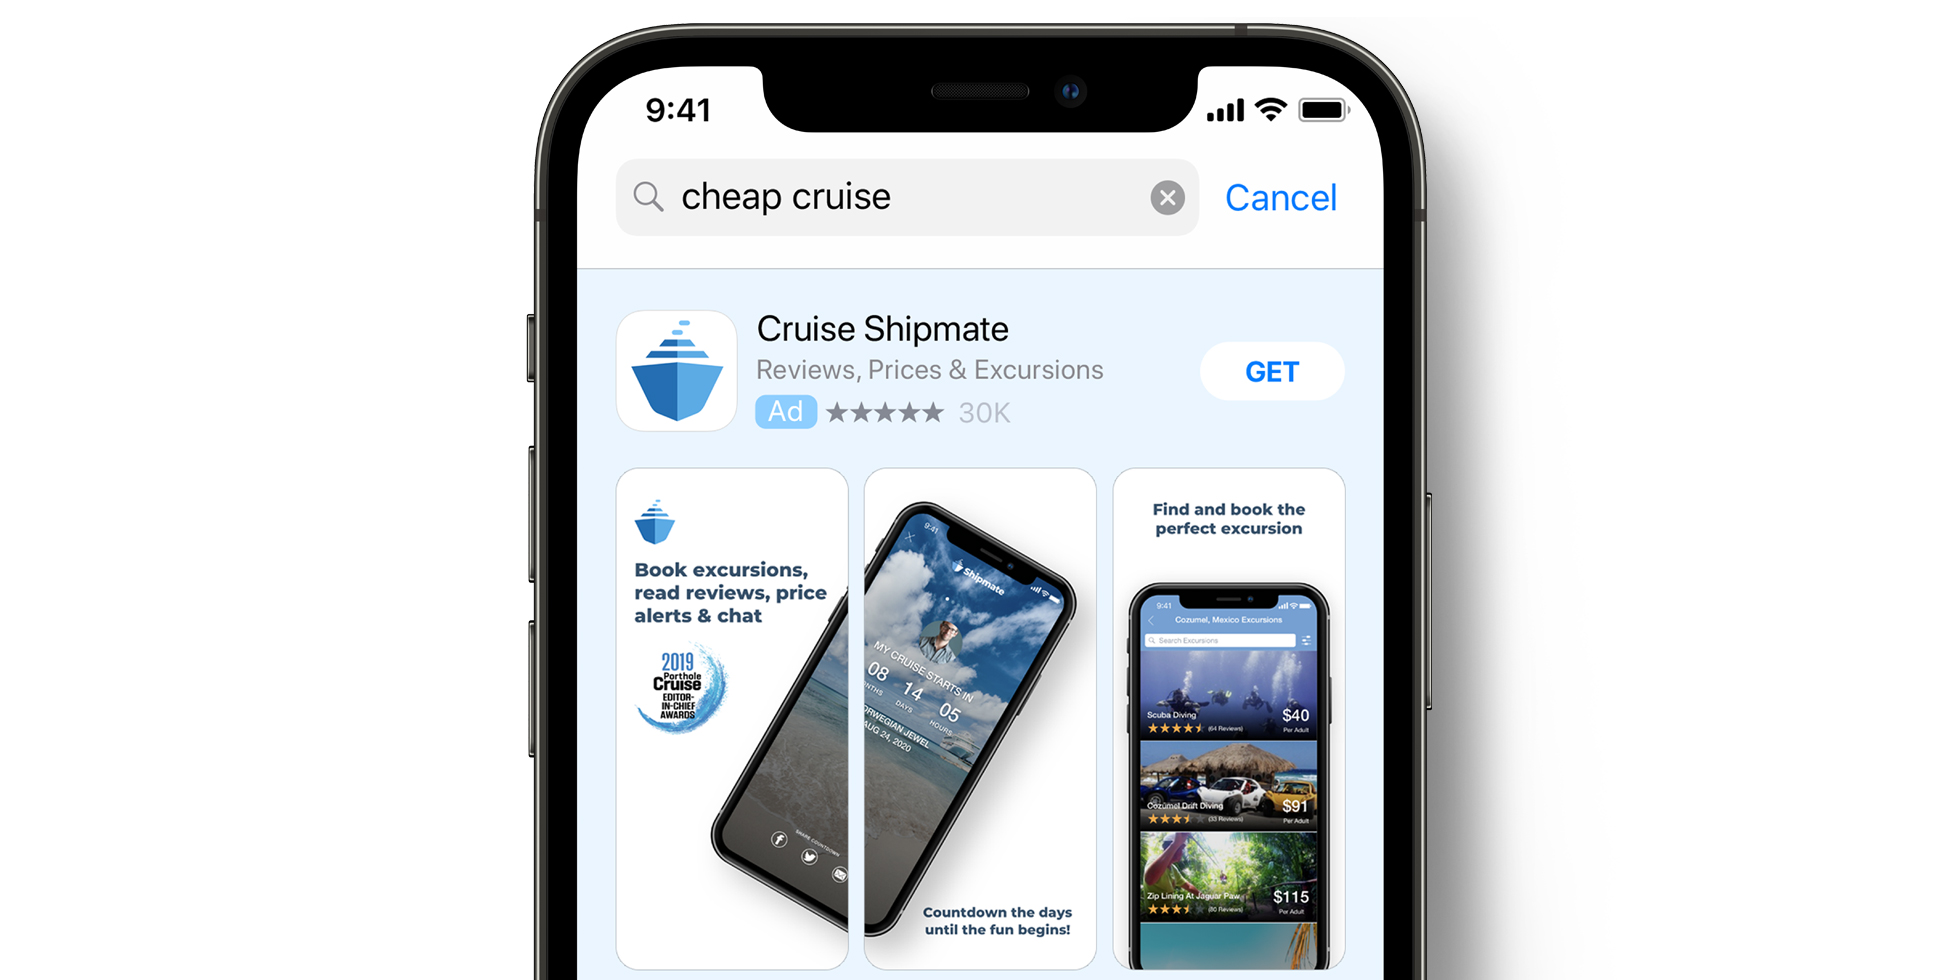 Cruise Shipmate Apple Search Ads ad on the App Store